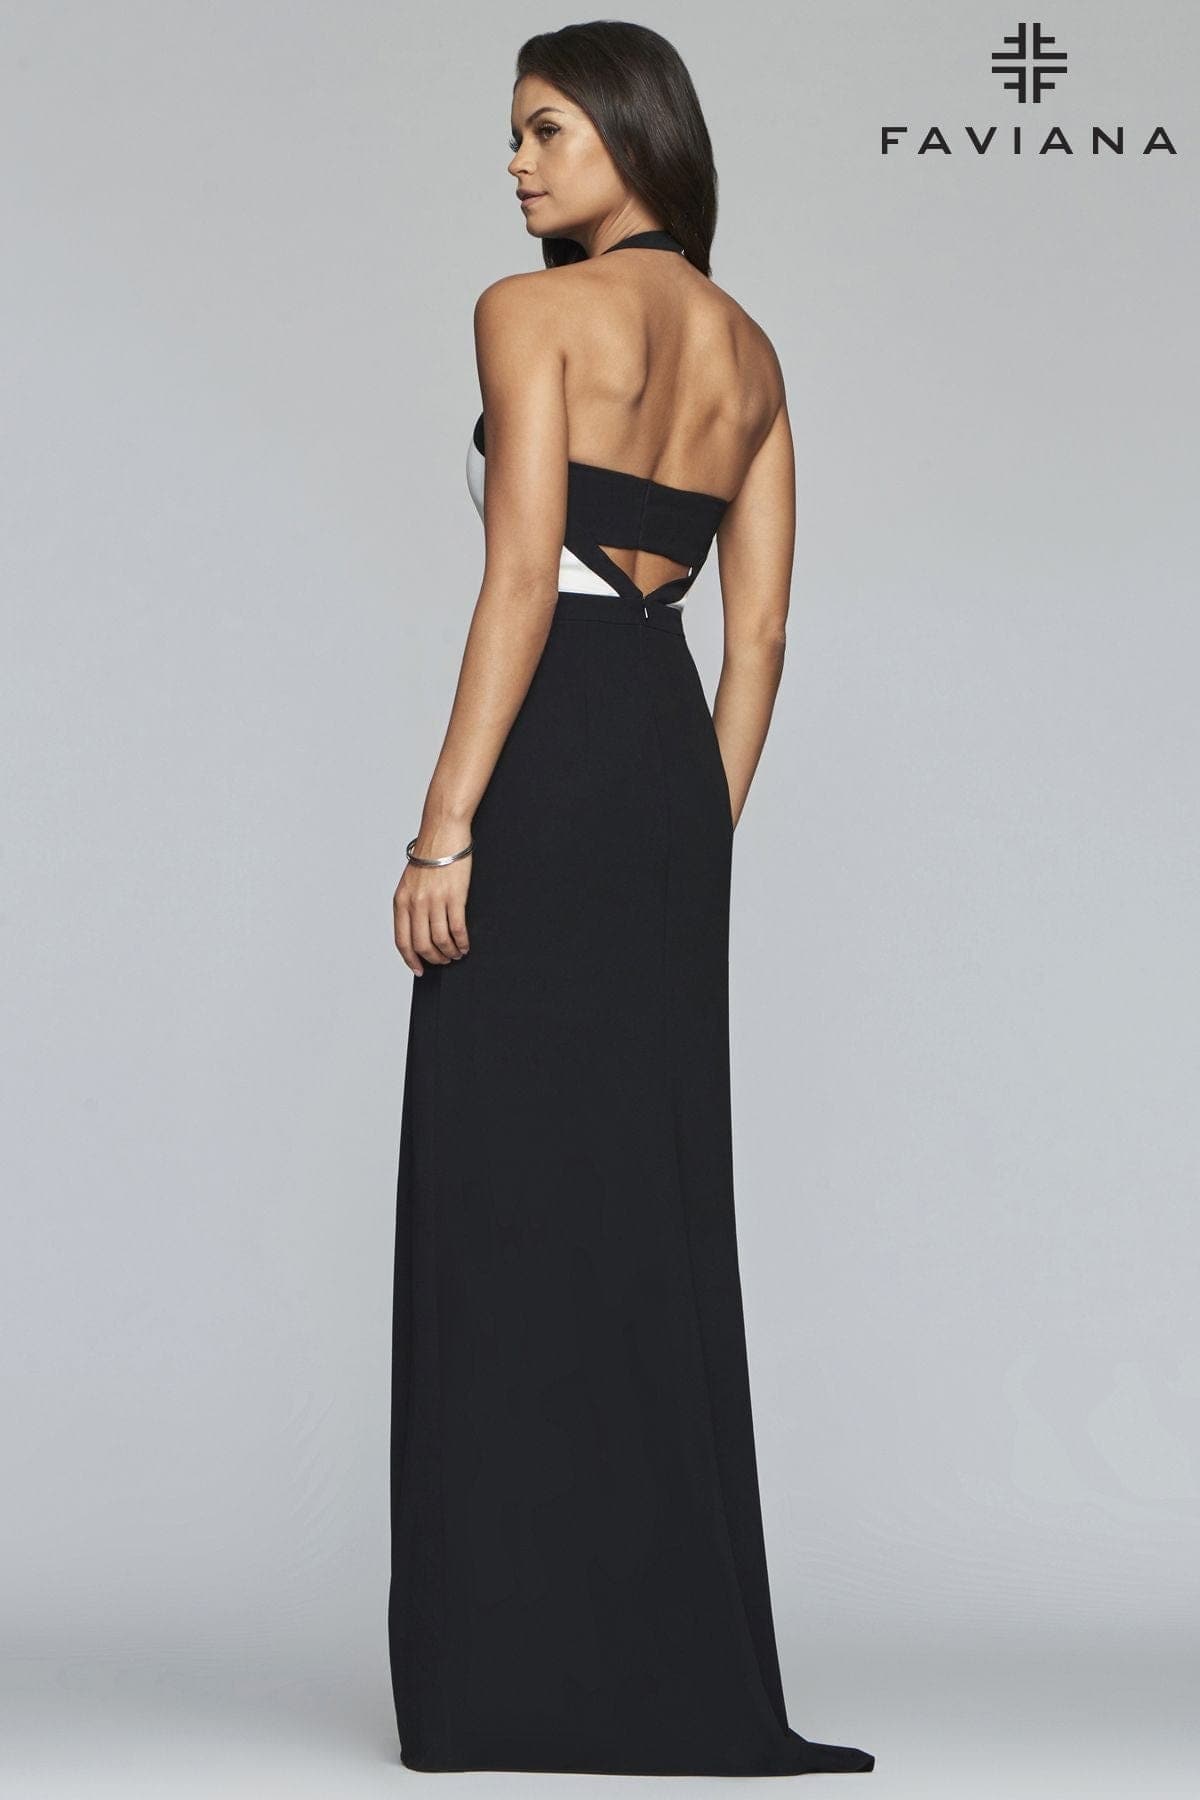 V Neck Halter Dress With Cutout Crepe Fabric